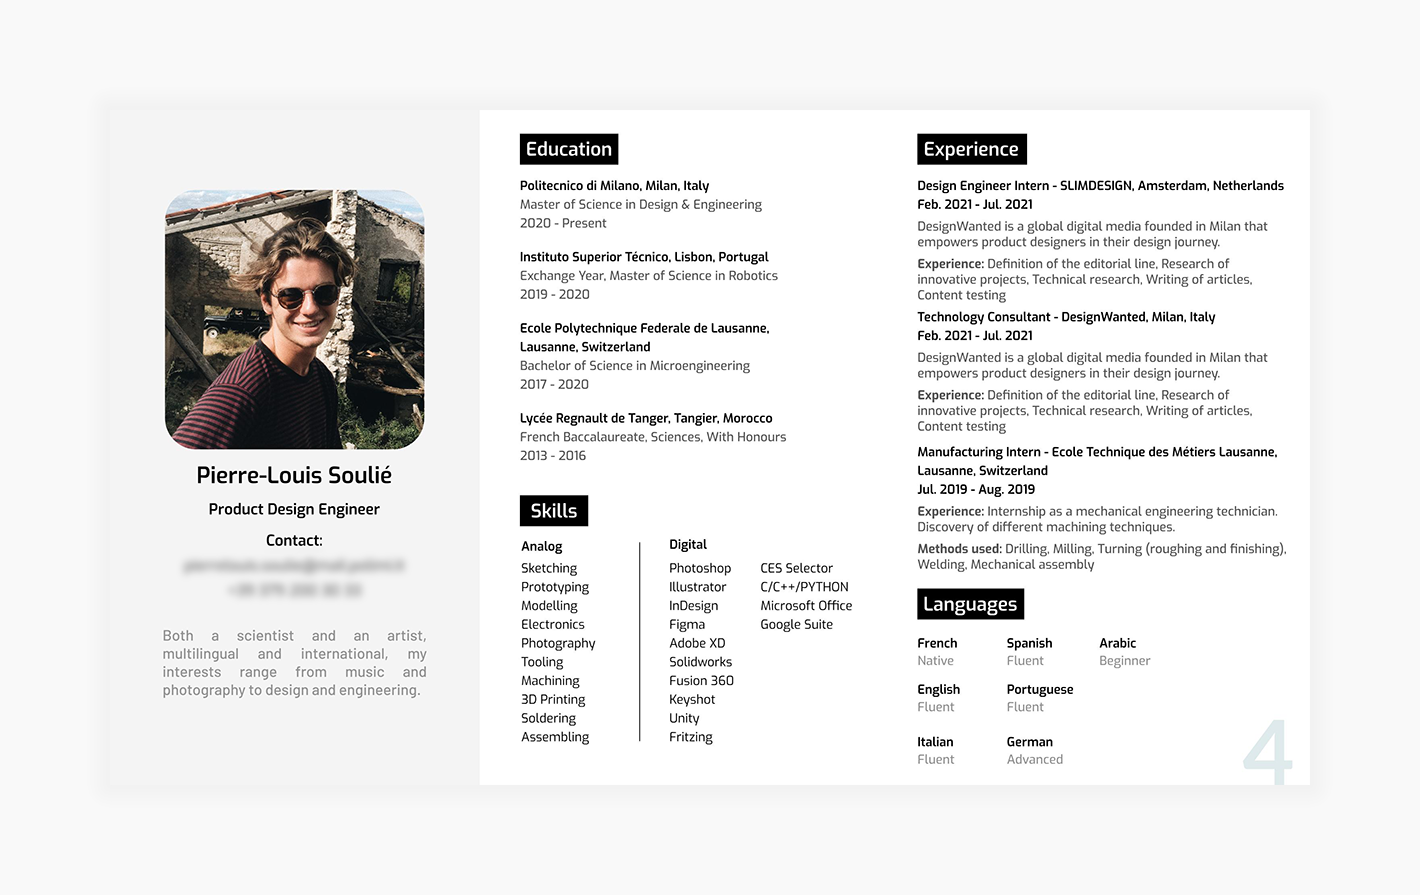 Screenshot of a resume page in a product design engineer portfolio